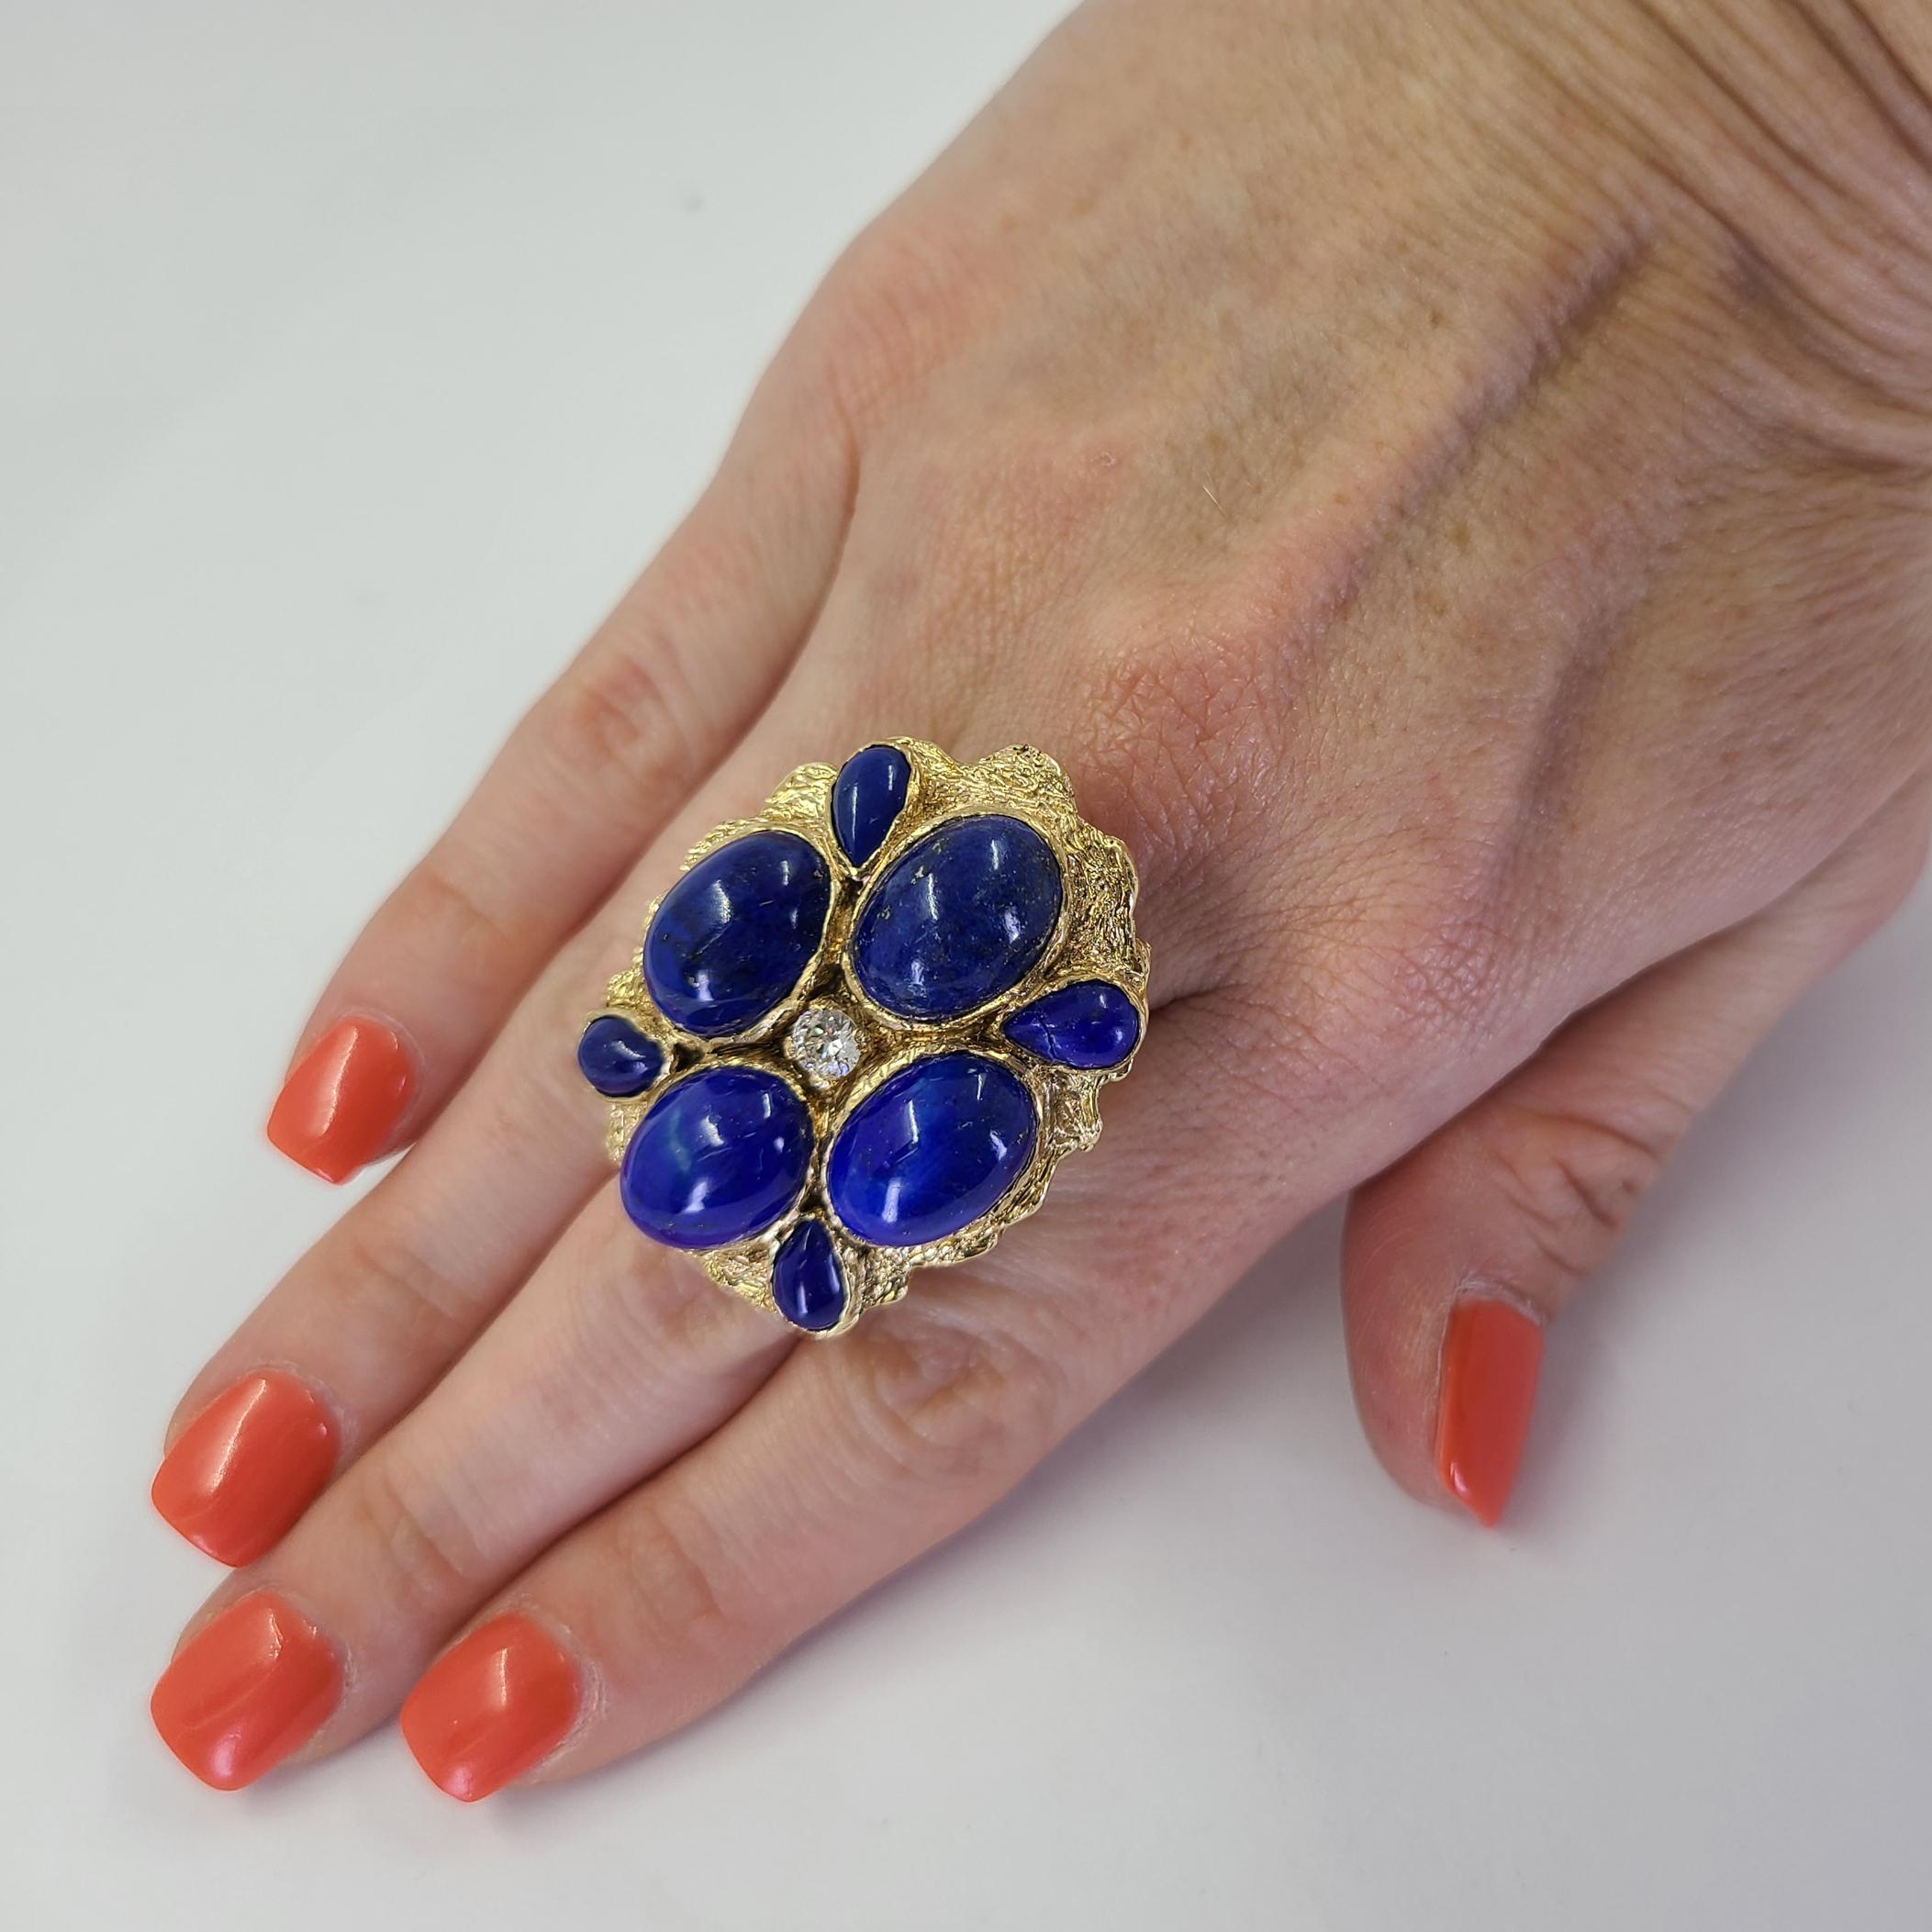 14 Karat Yellow Gold Large Freeform Ring Featuring 8 Cabochon Cut Lapis Lazuli & A 0.25 Carat Round Brilliant Cut Diamond Of VS Clarity & H Color. Finger Size 7.25; Purchase Includes One Sizing Service. Finished Weight Is 27.8 Grams.